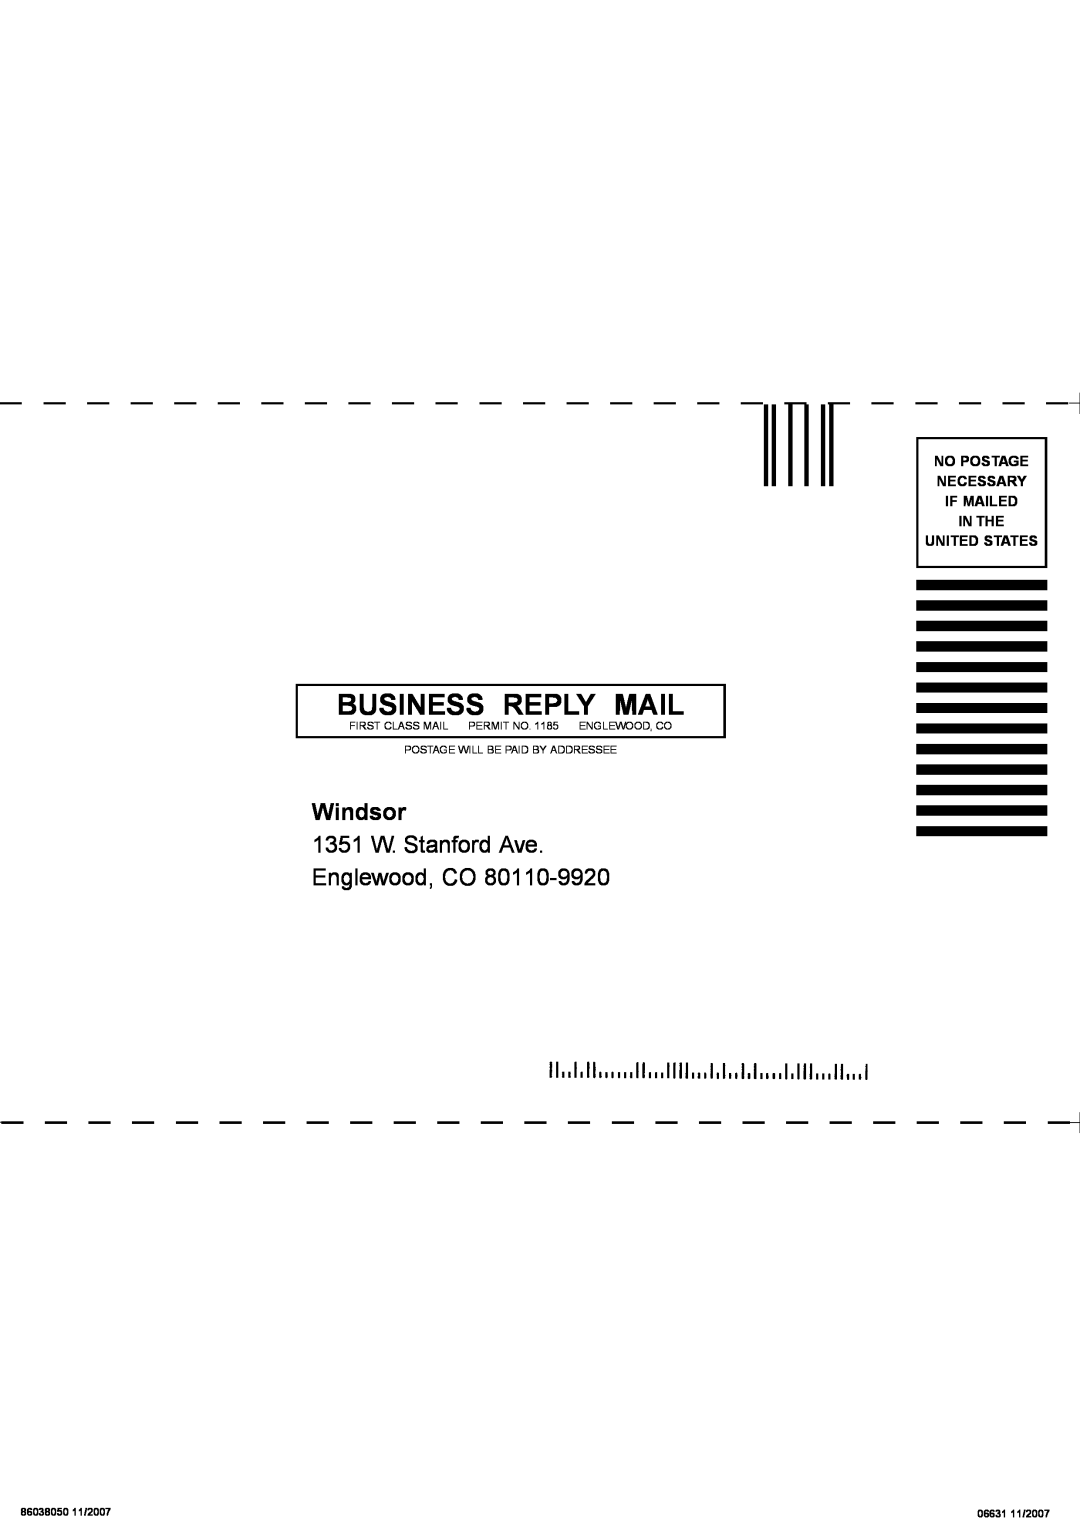 Windsor VSP18 Business Reply Mail, Windsor, 1351 W. Stanford Ave Englewood, CO, No Postage Necessary If Mailed In The 